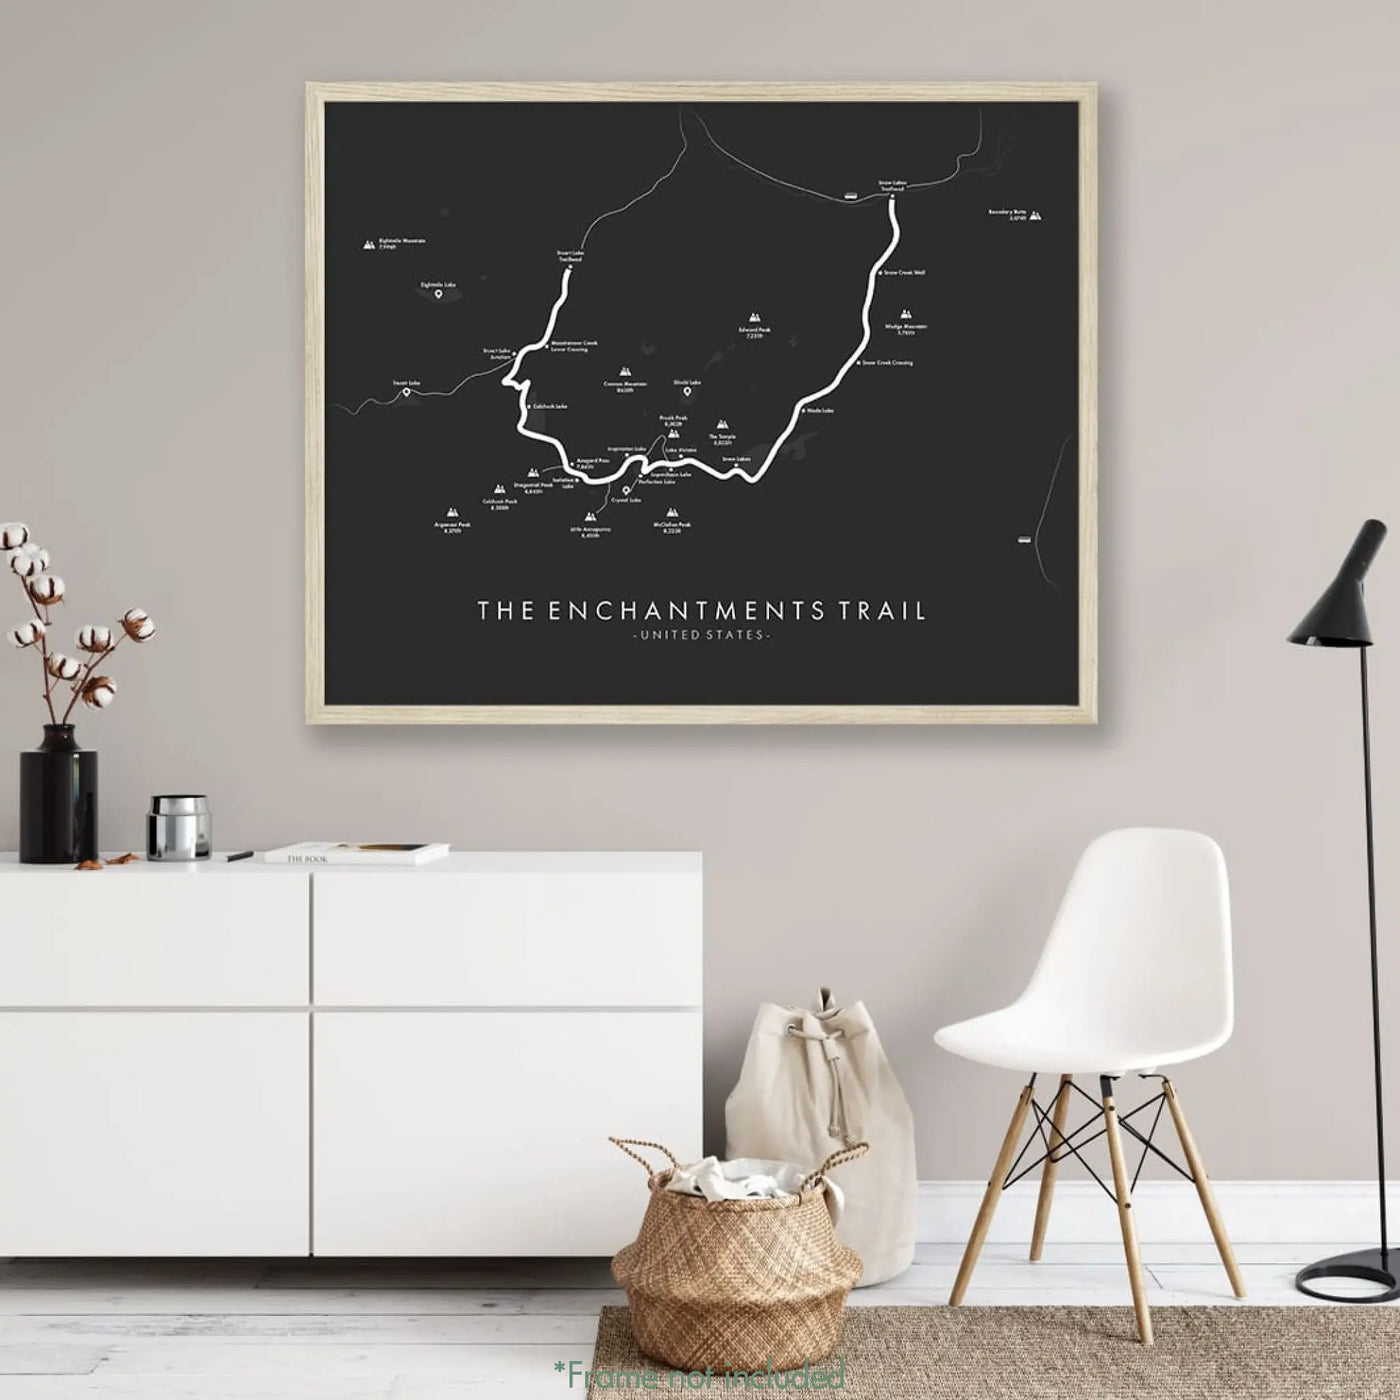 Trail Poster of The Enchantments Trail - Grey Mockup